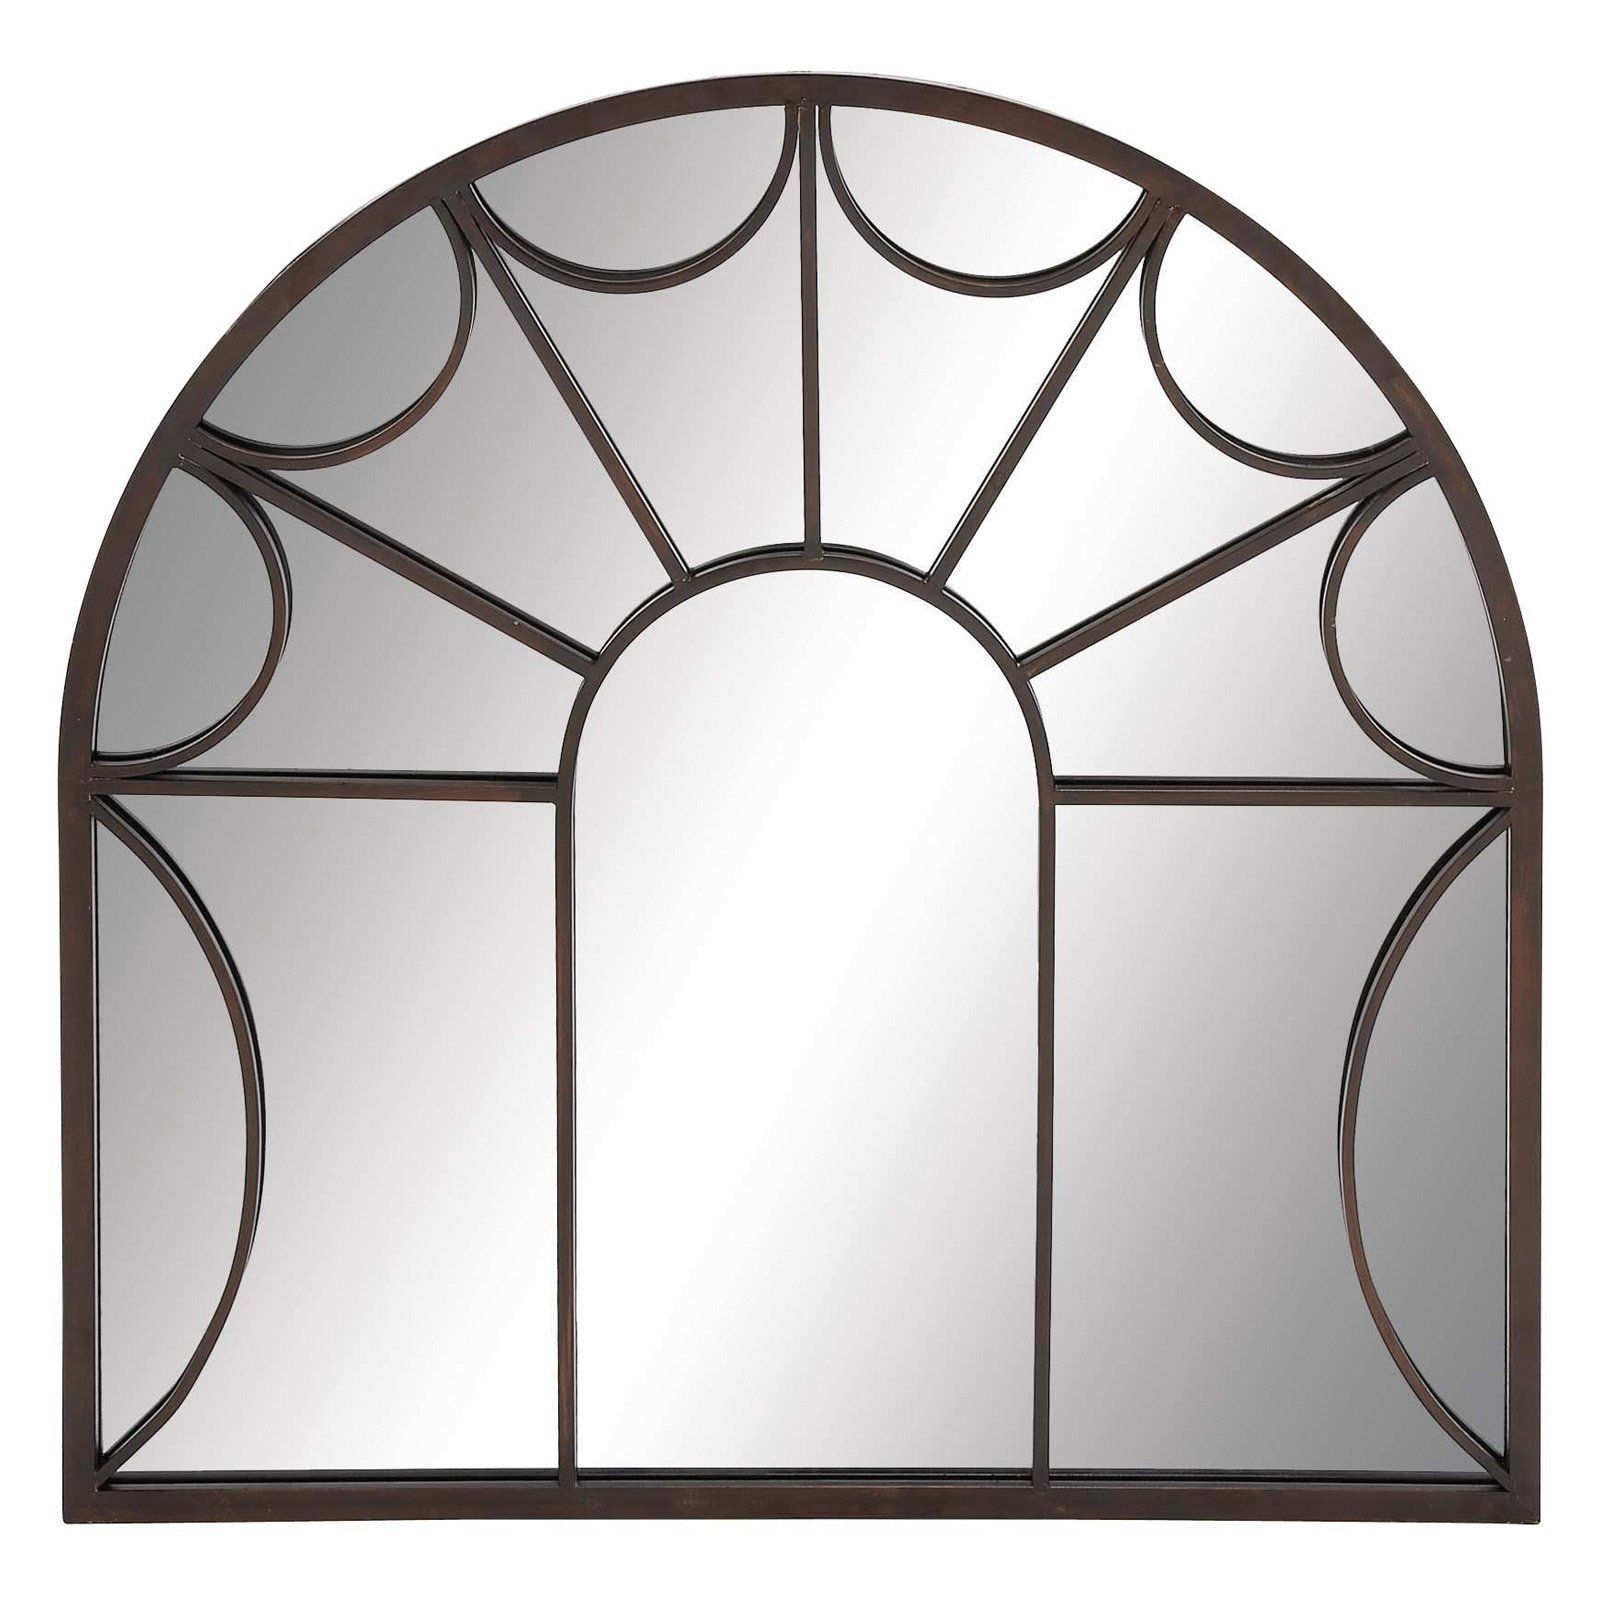 Decmode Traditional Iron Arched Wall Mirror | Mirror Wall, Traditional Inside Metal Arch Window Wall Mirrors (View 2 of 15)